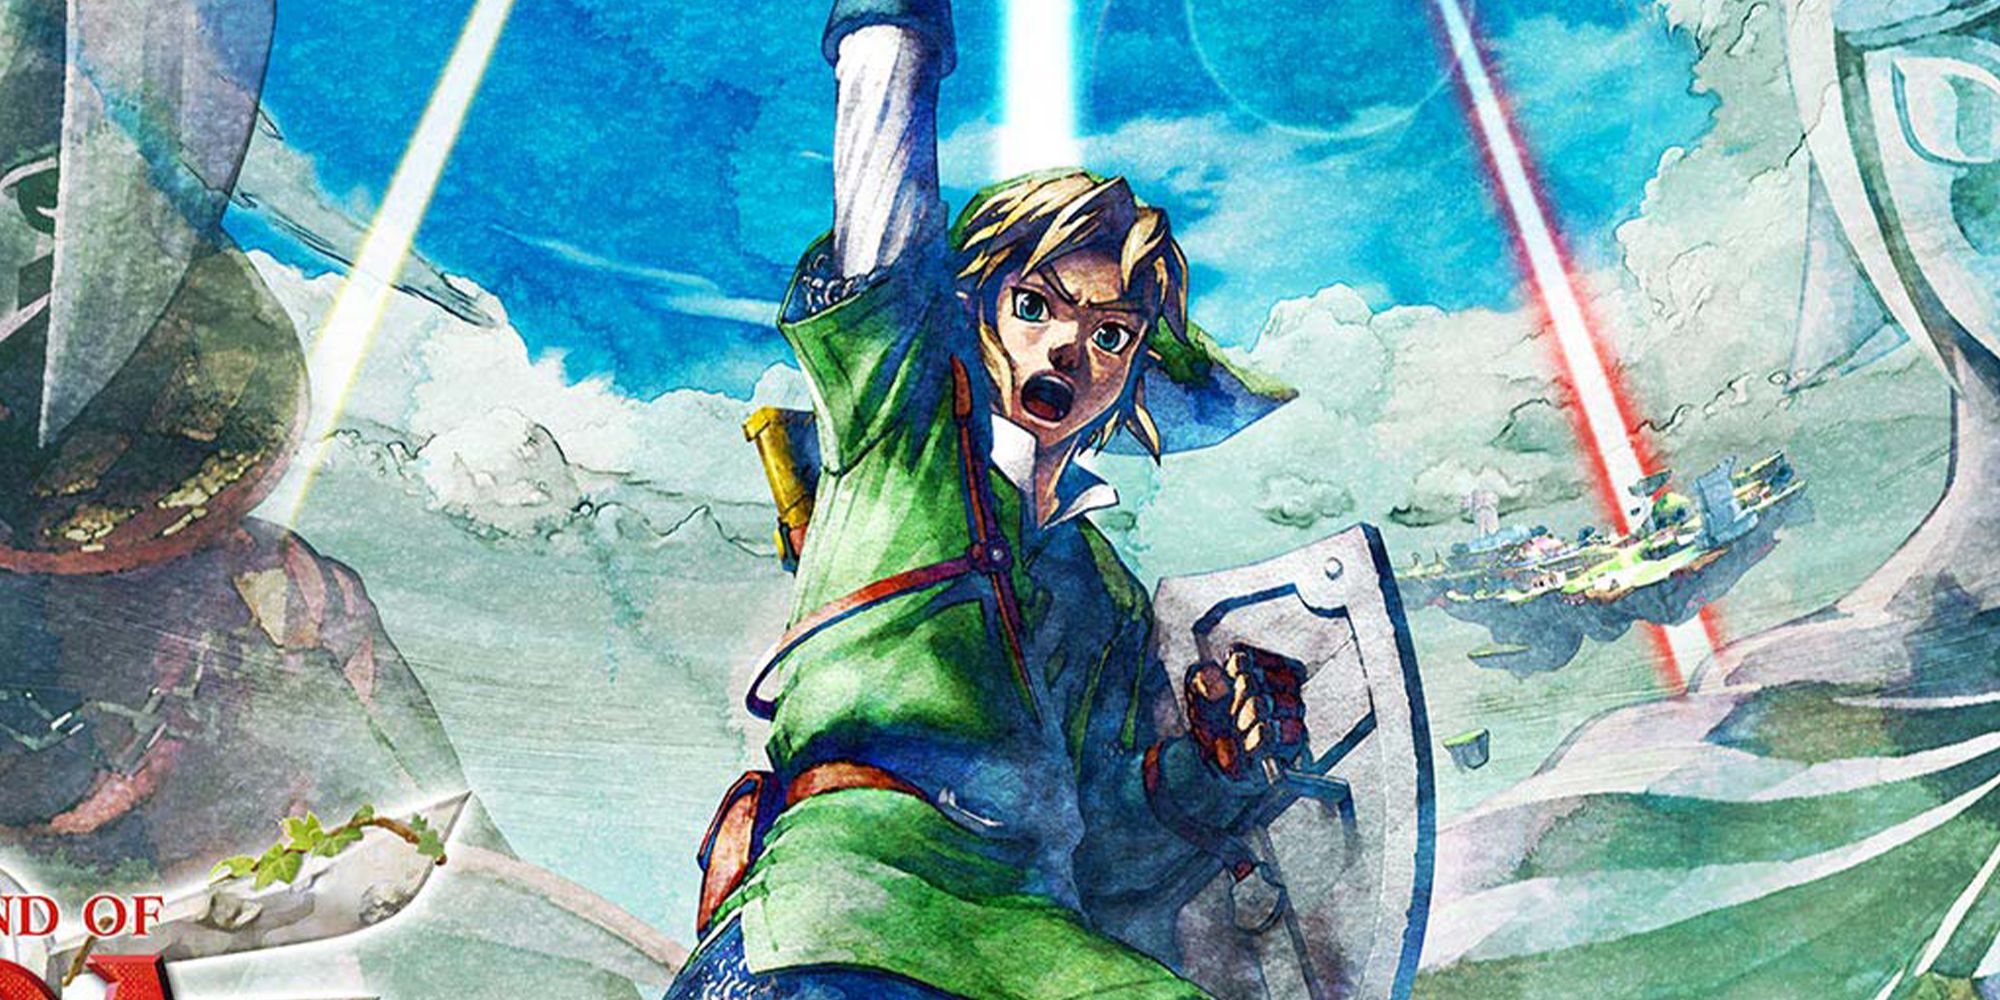 Legend of Zelda Skyward Sword HD Best Things To Do After Beating The Game